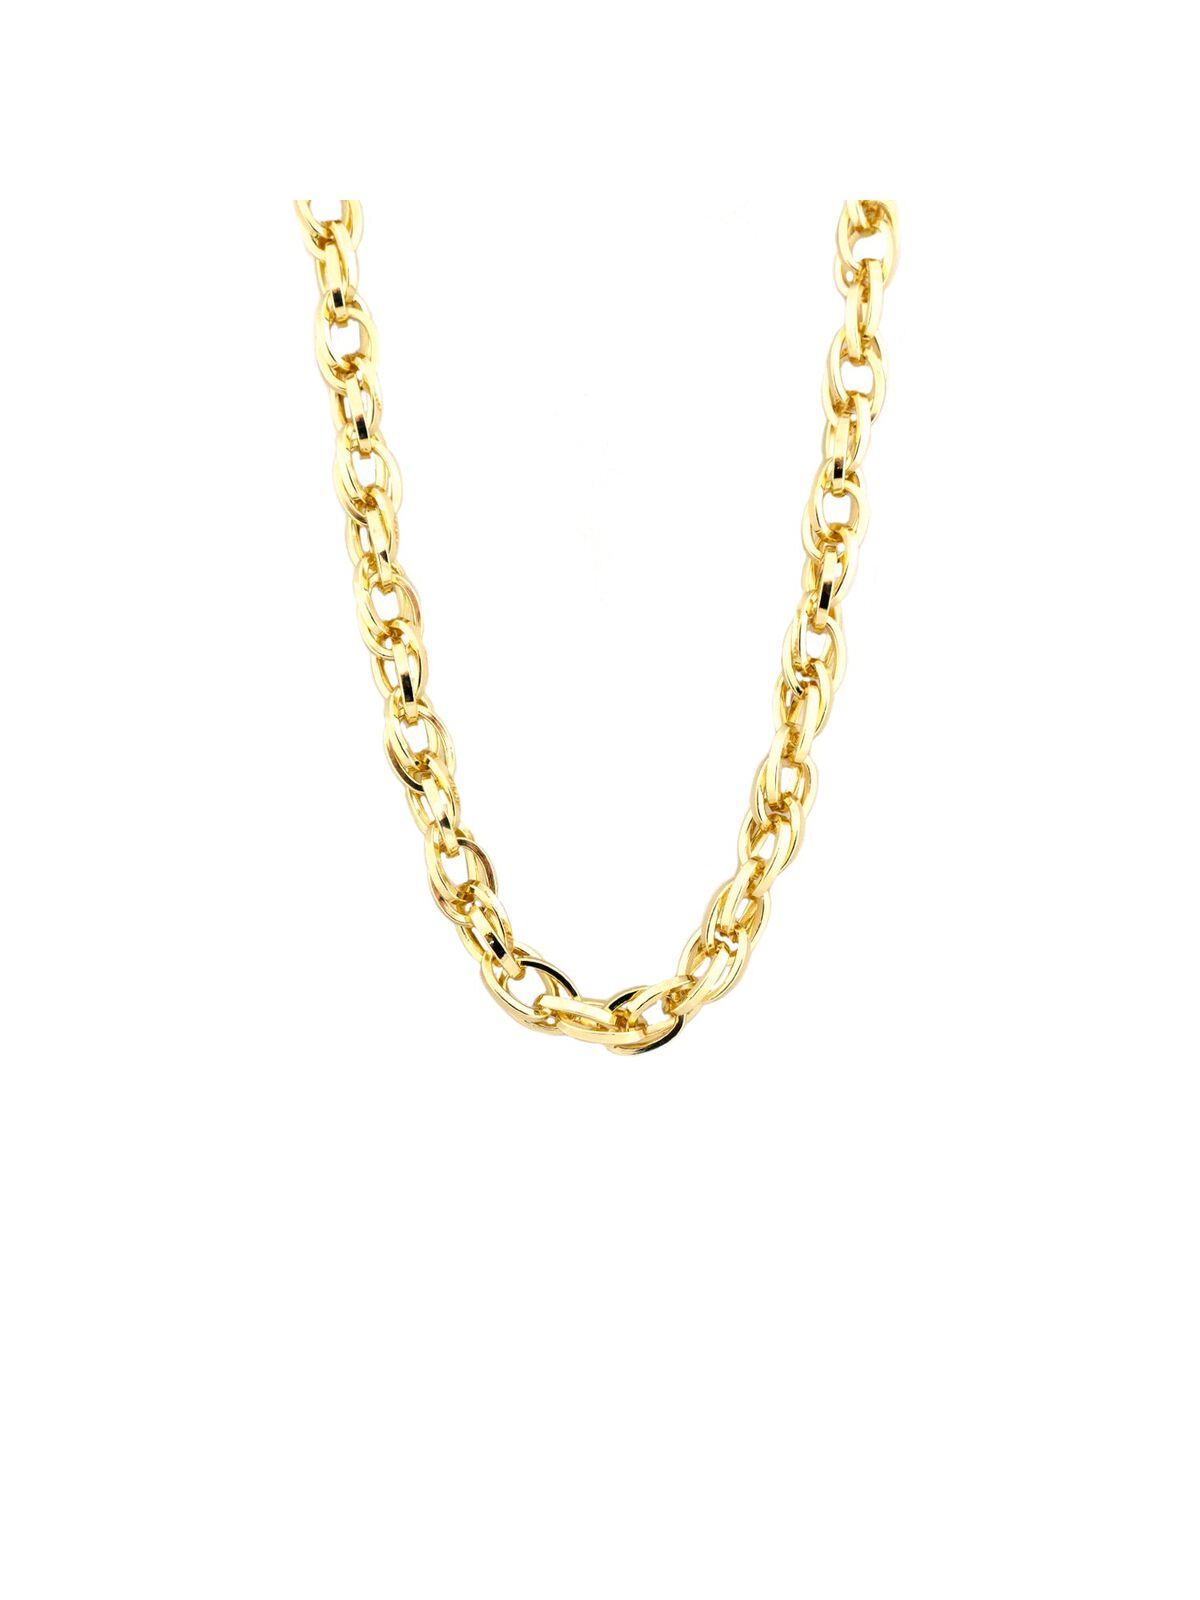 Marlyn Schiff Short Twisted Oval Link Necklace